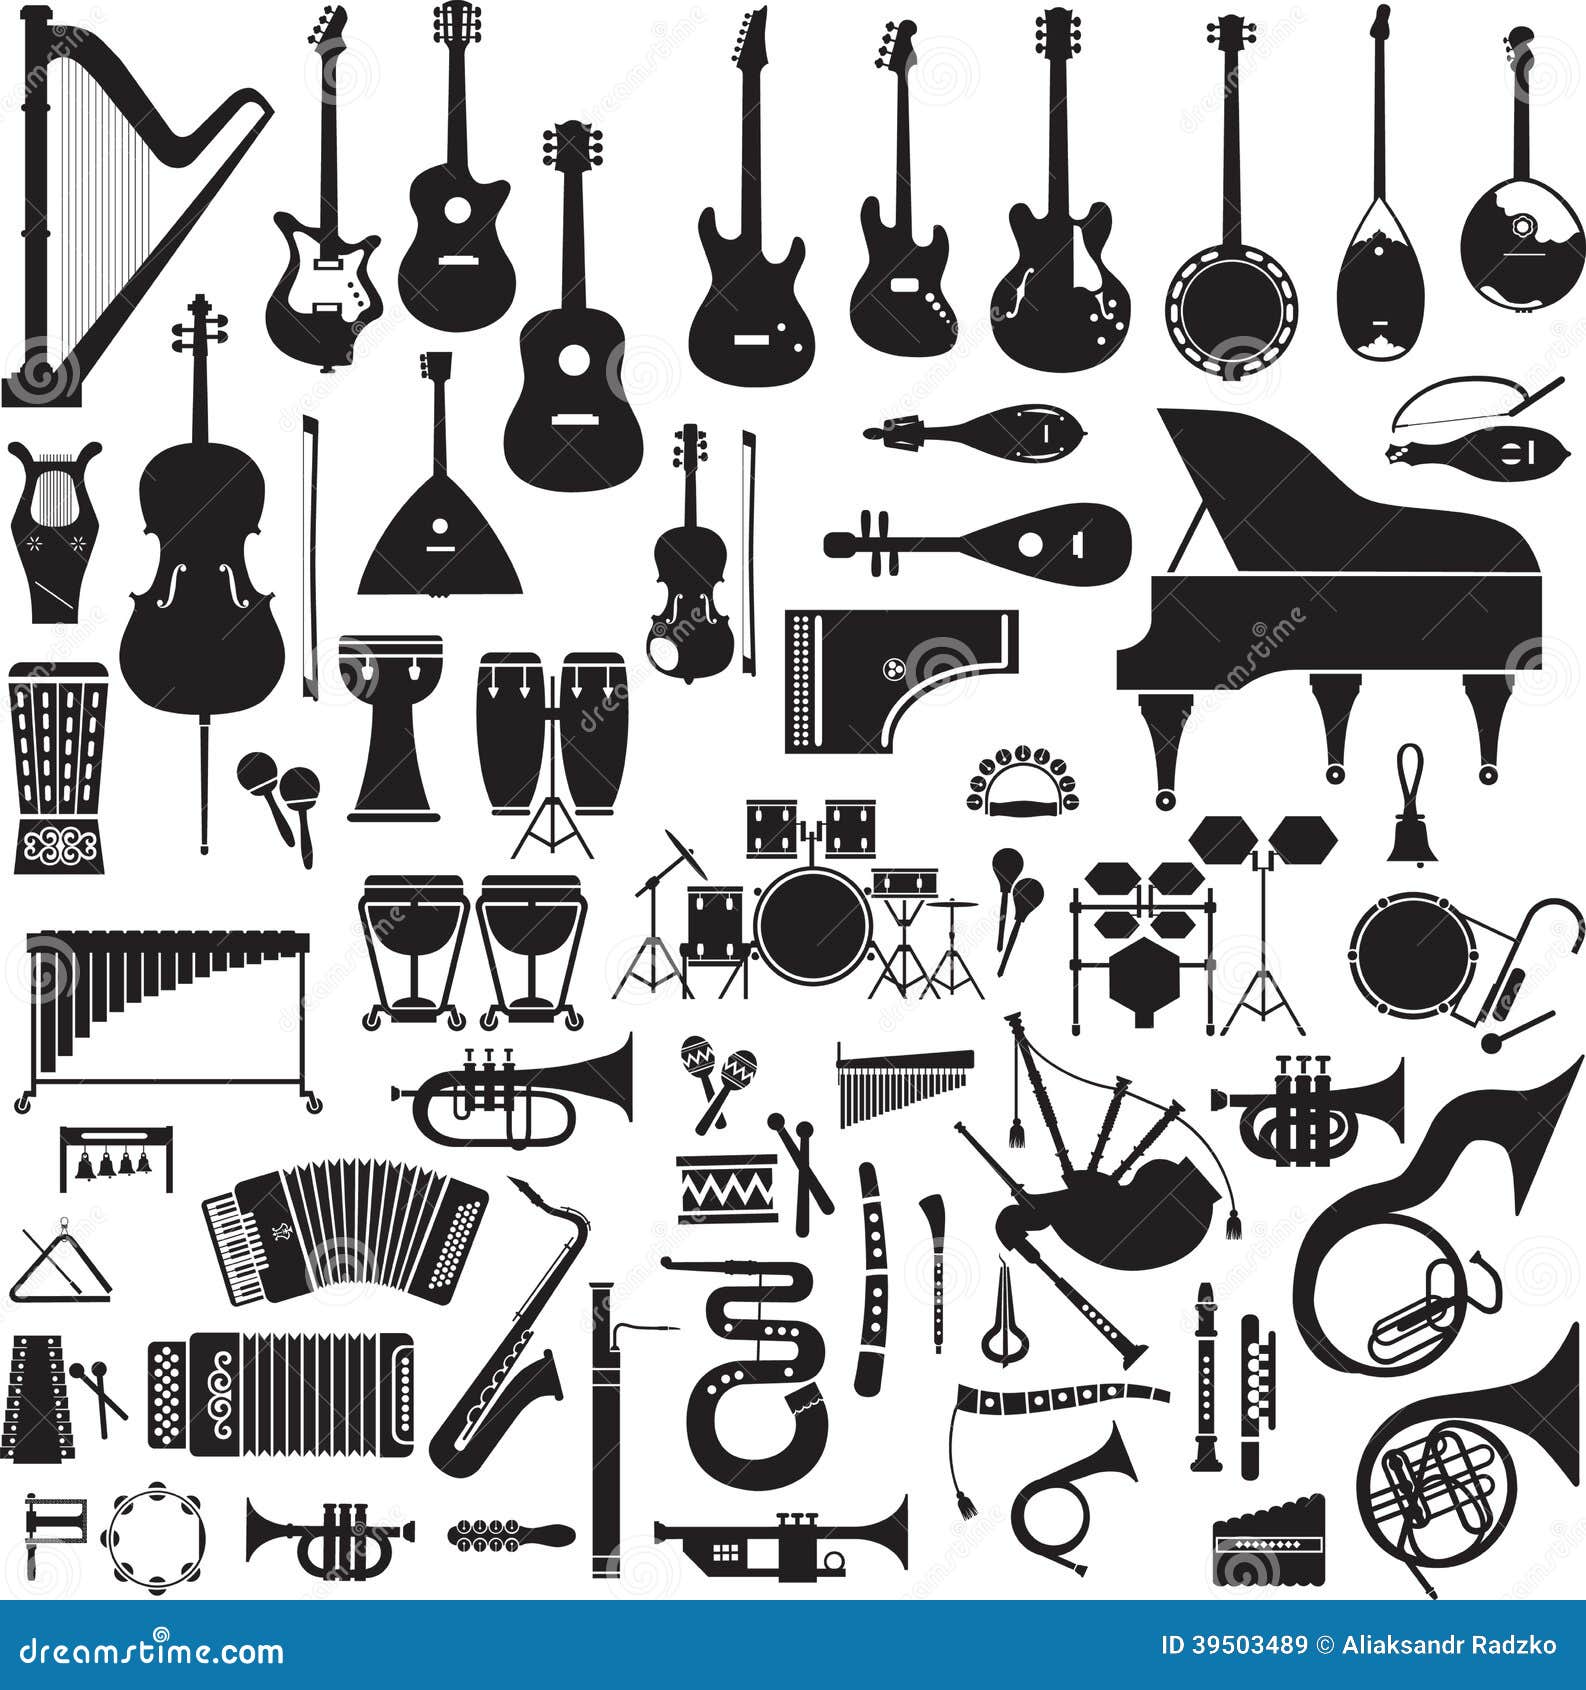 60 images of musical instruments